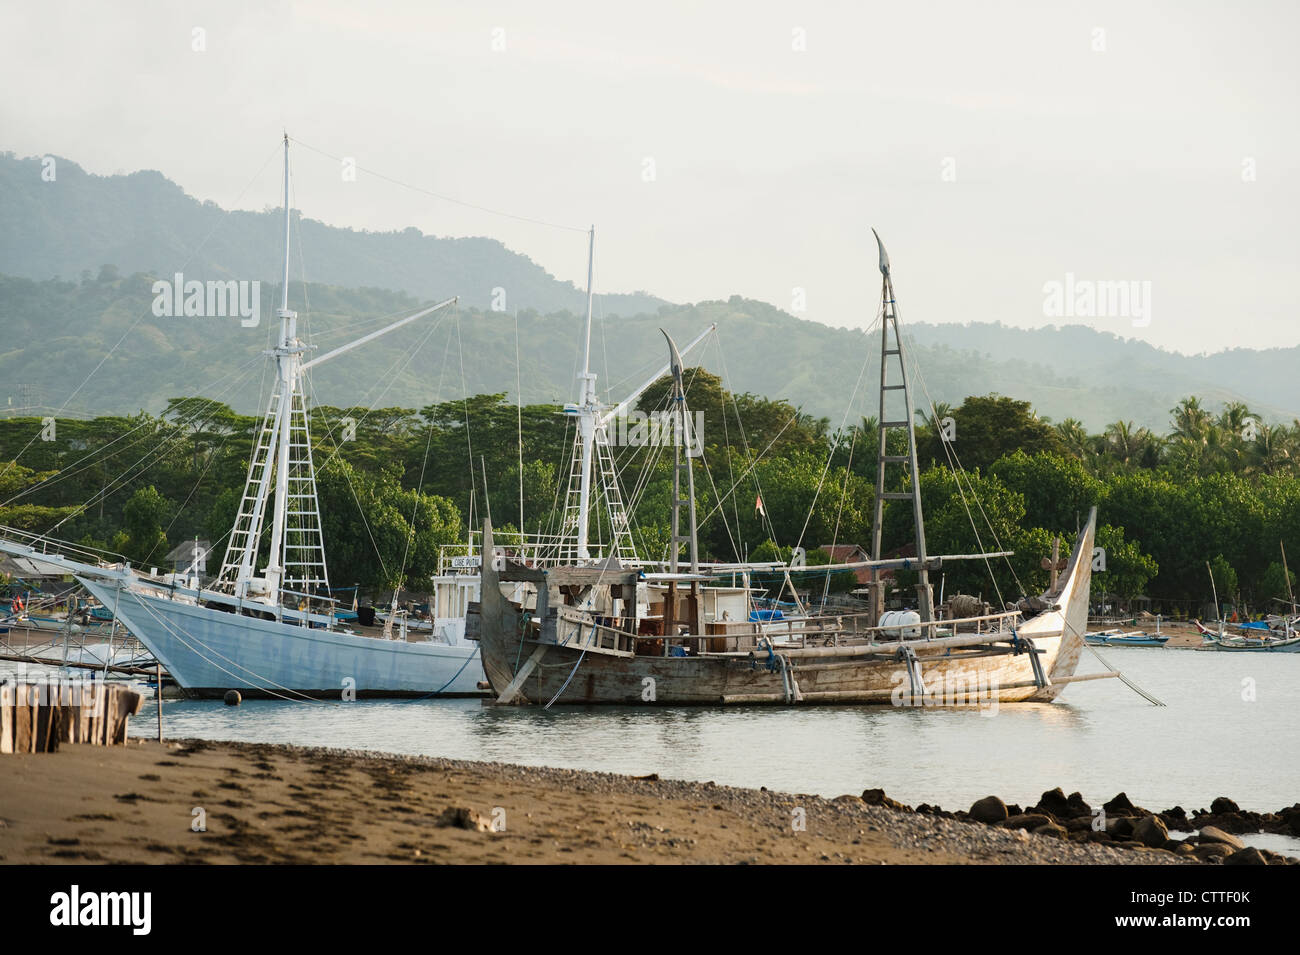 An exotic purse seine fishing boat called a Prahu Madura is docked in the fishing village of Pemuteran, Bali, Indonesia. Stock Photo